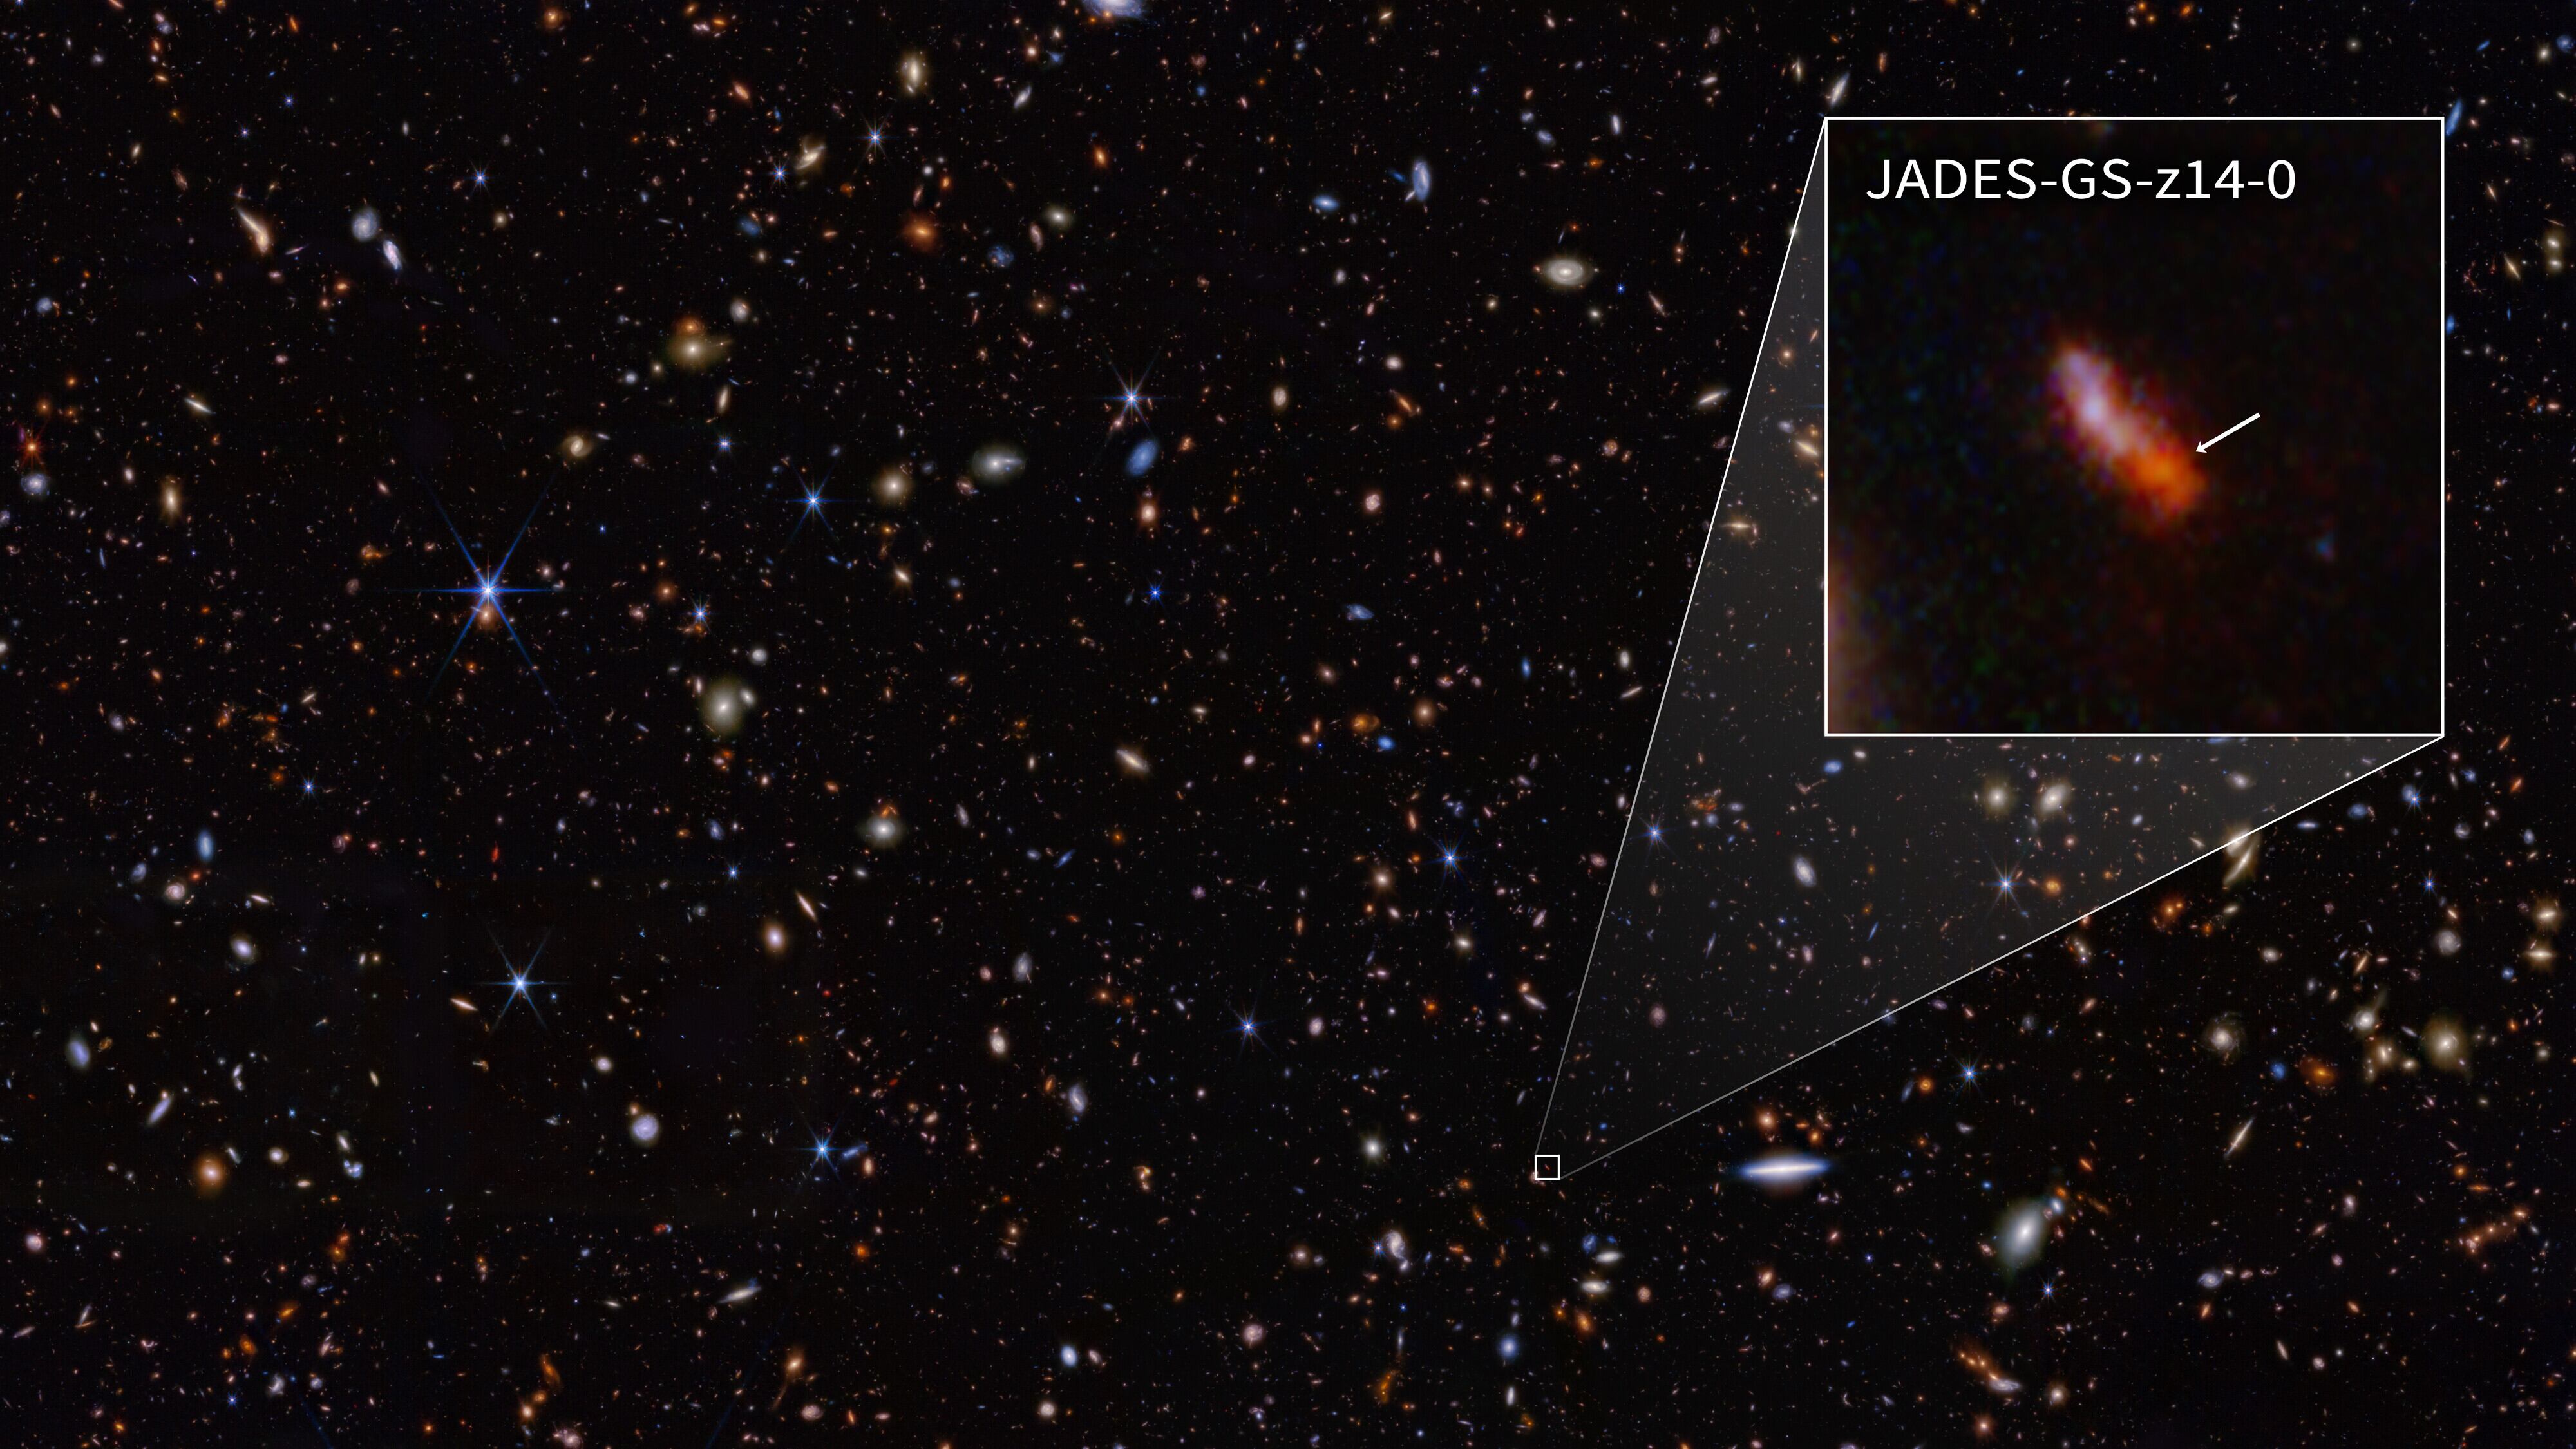 Using the James Webb Space Telescope, scientists have found a record-breaking galaxy observed only 290 million years after the Big Bang